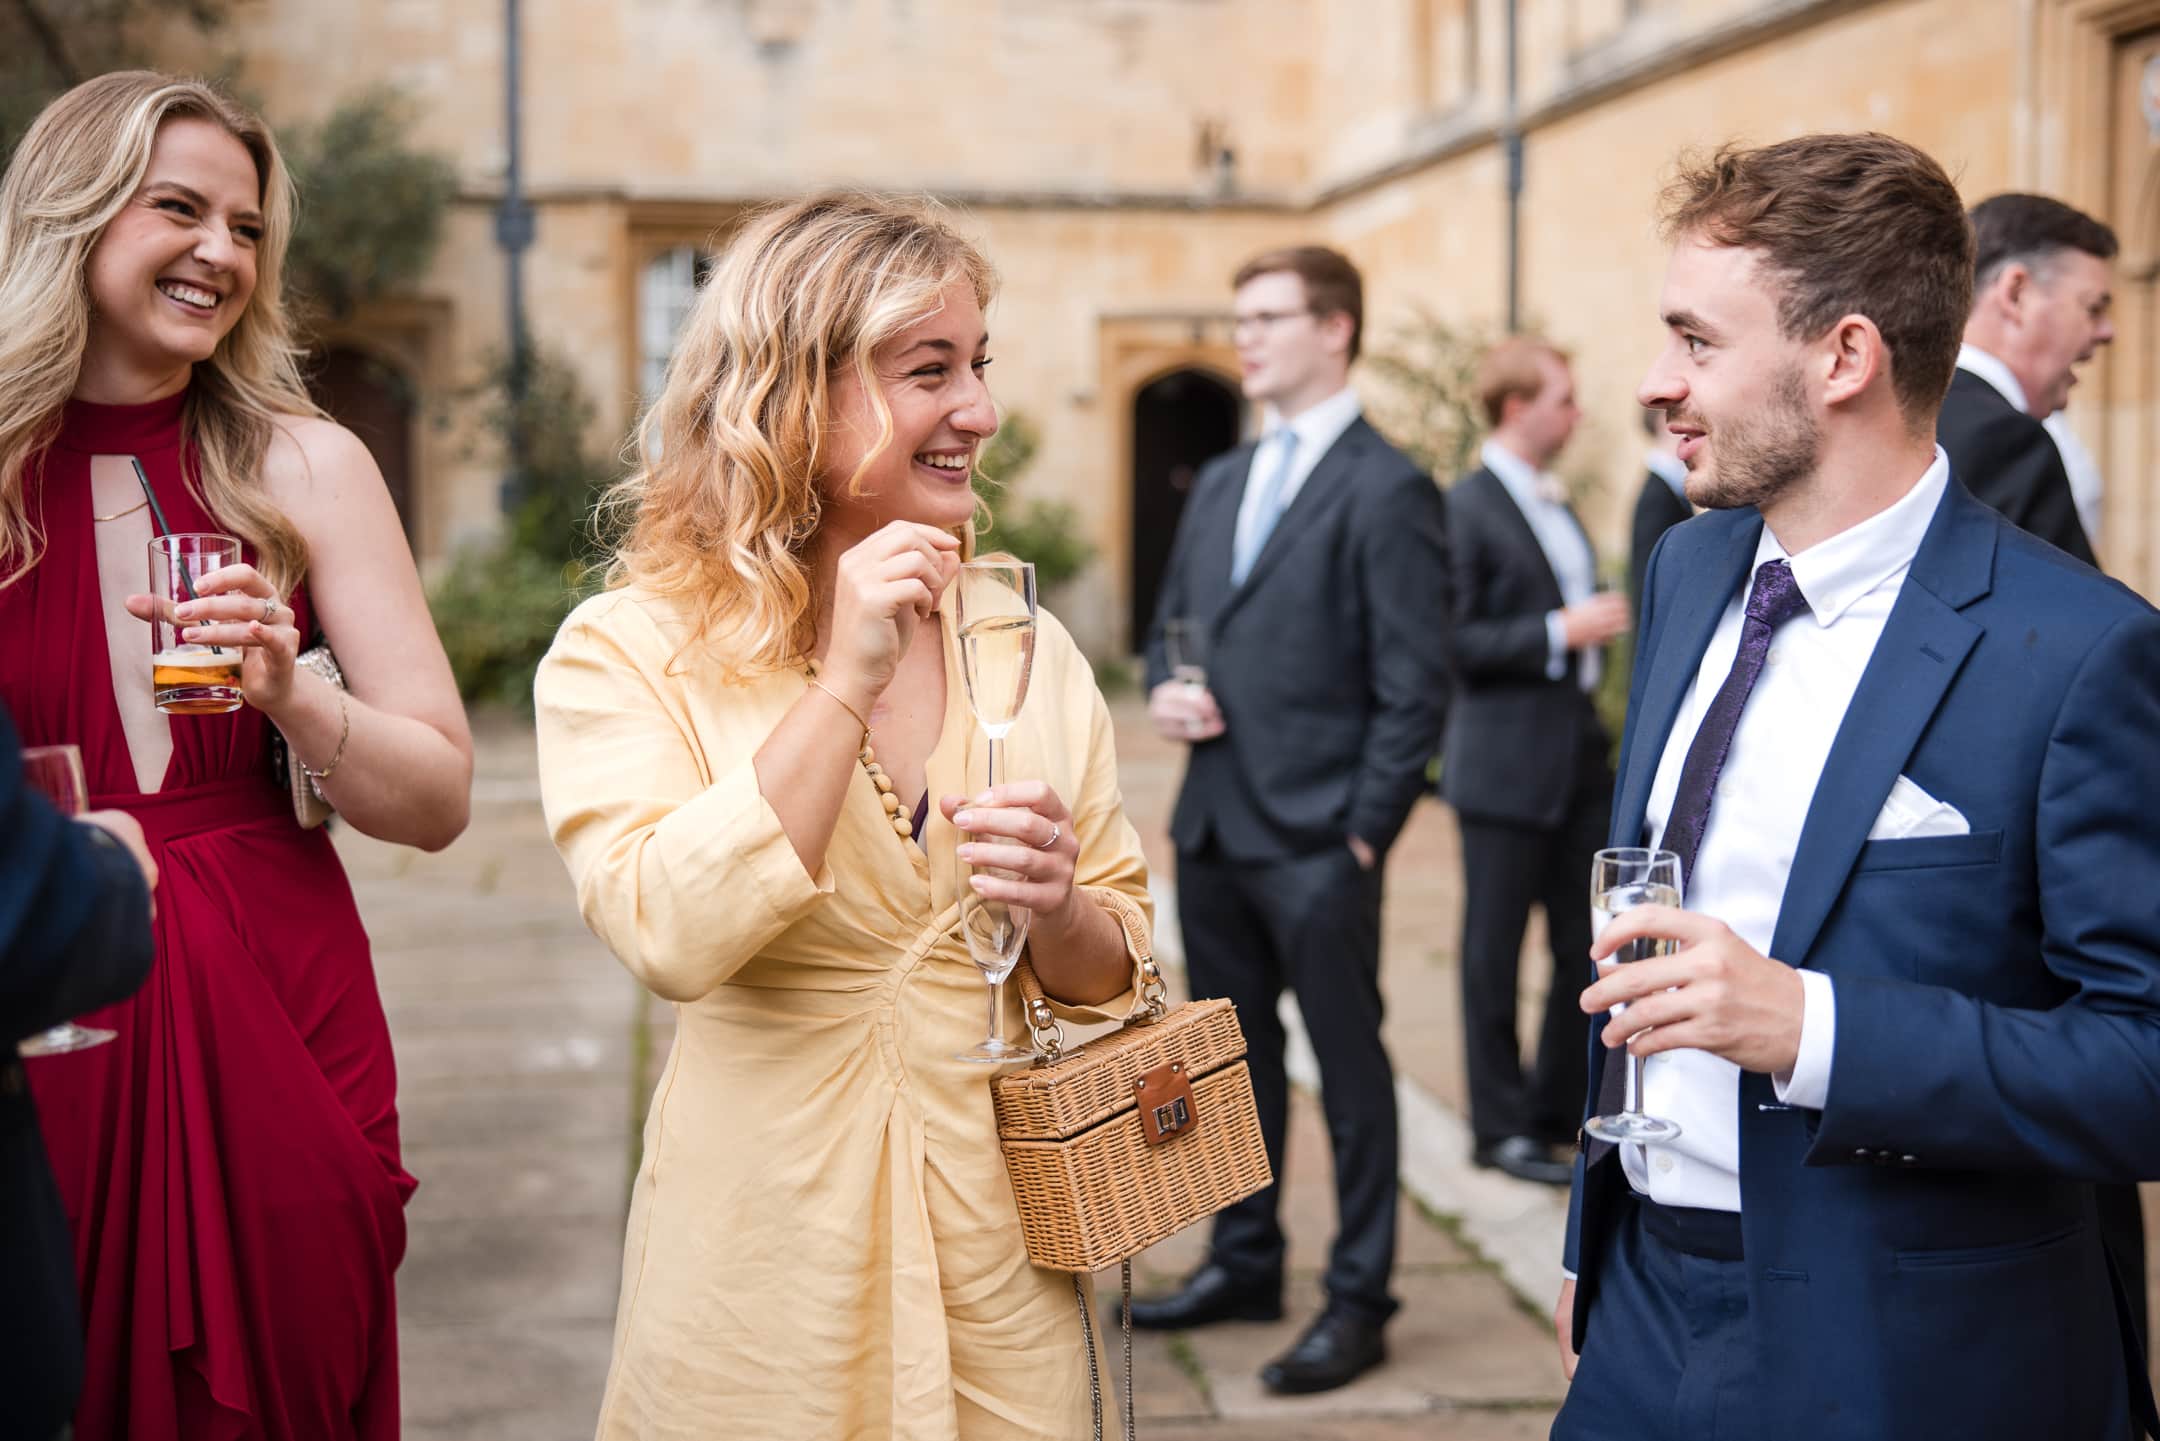 Guests enjoying Champagne reception in the Quad at Corpus Christi College Oxford Wedding